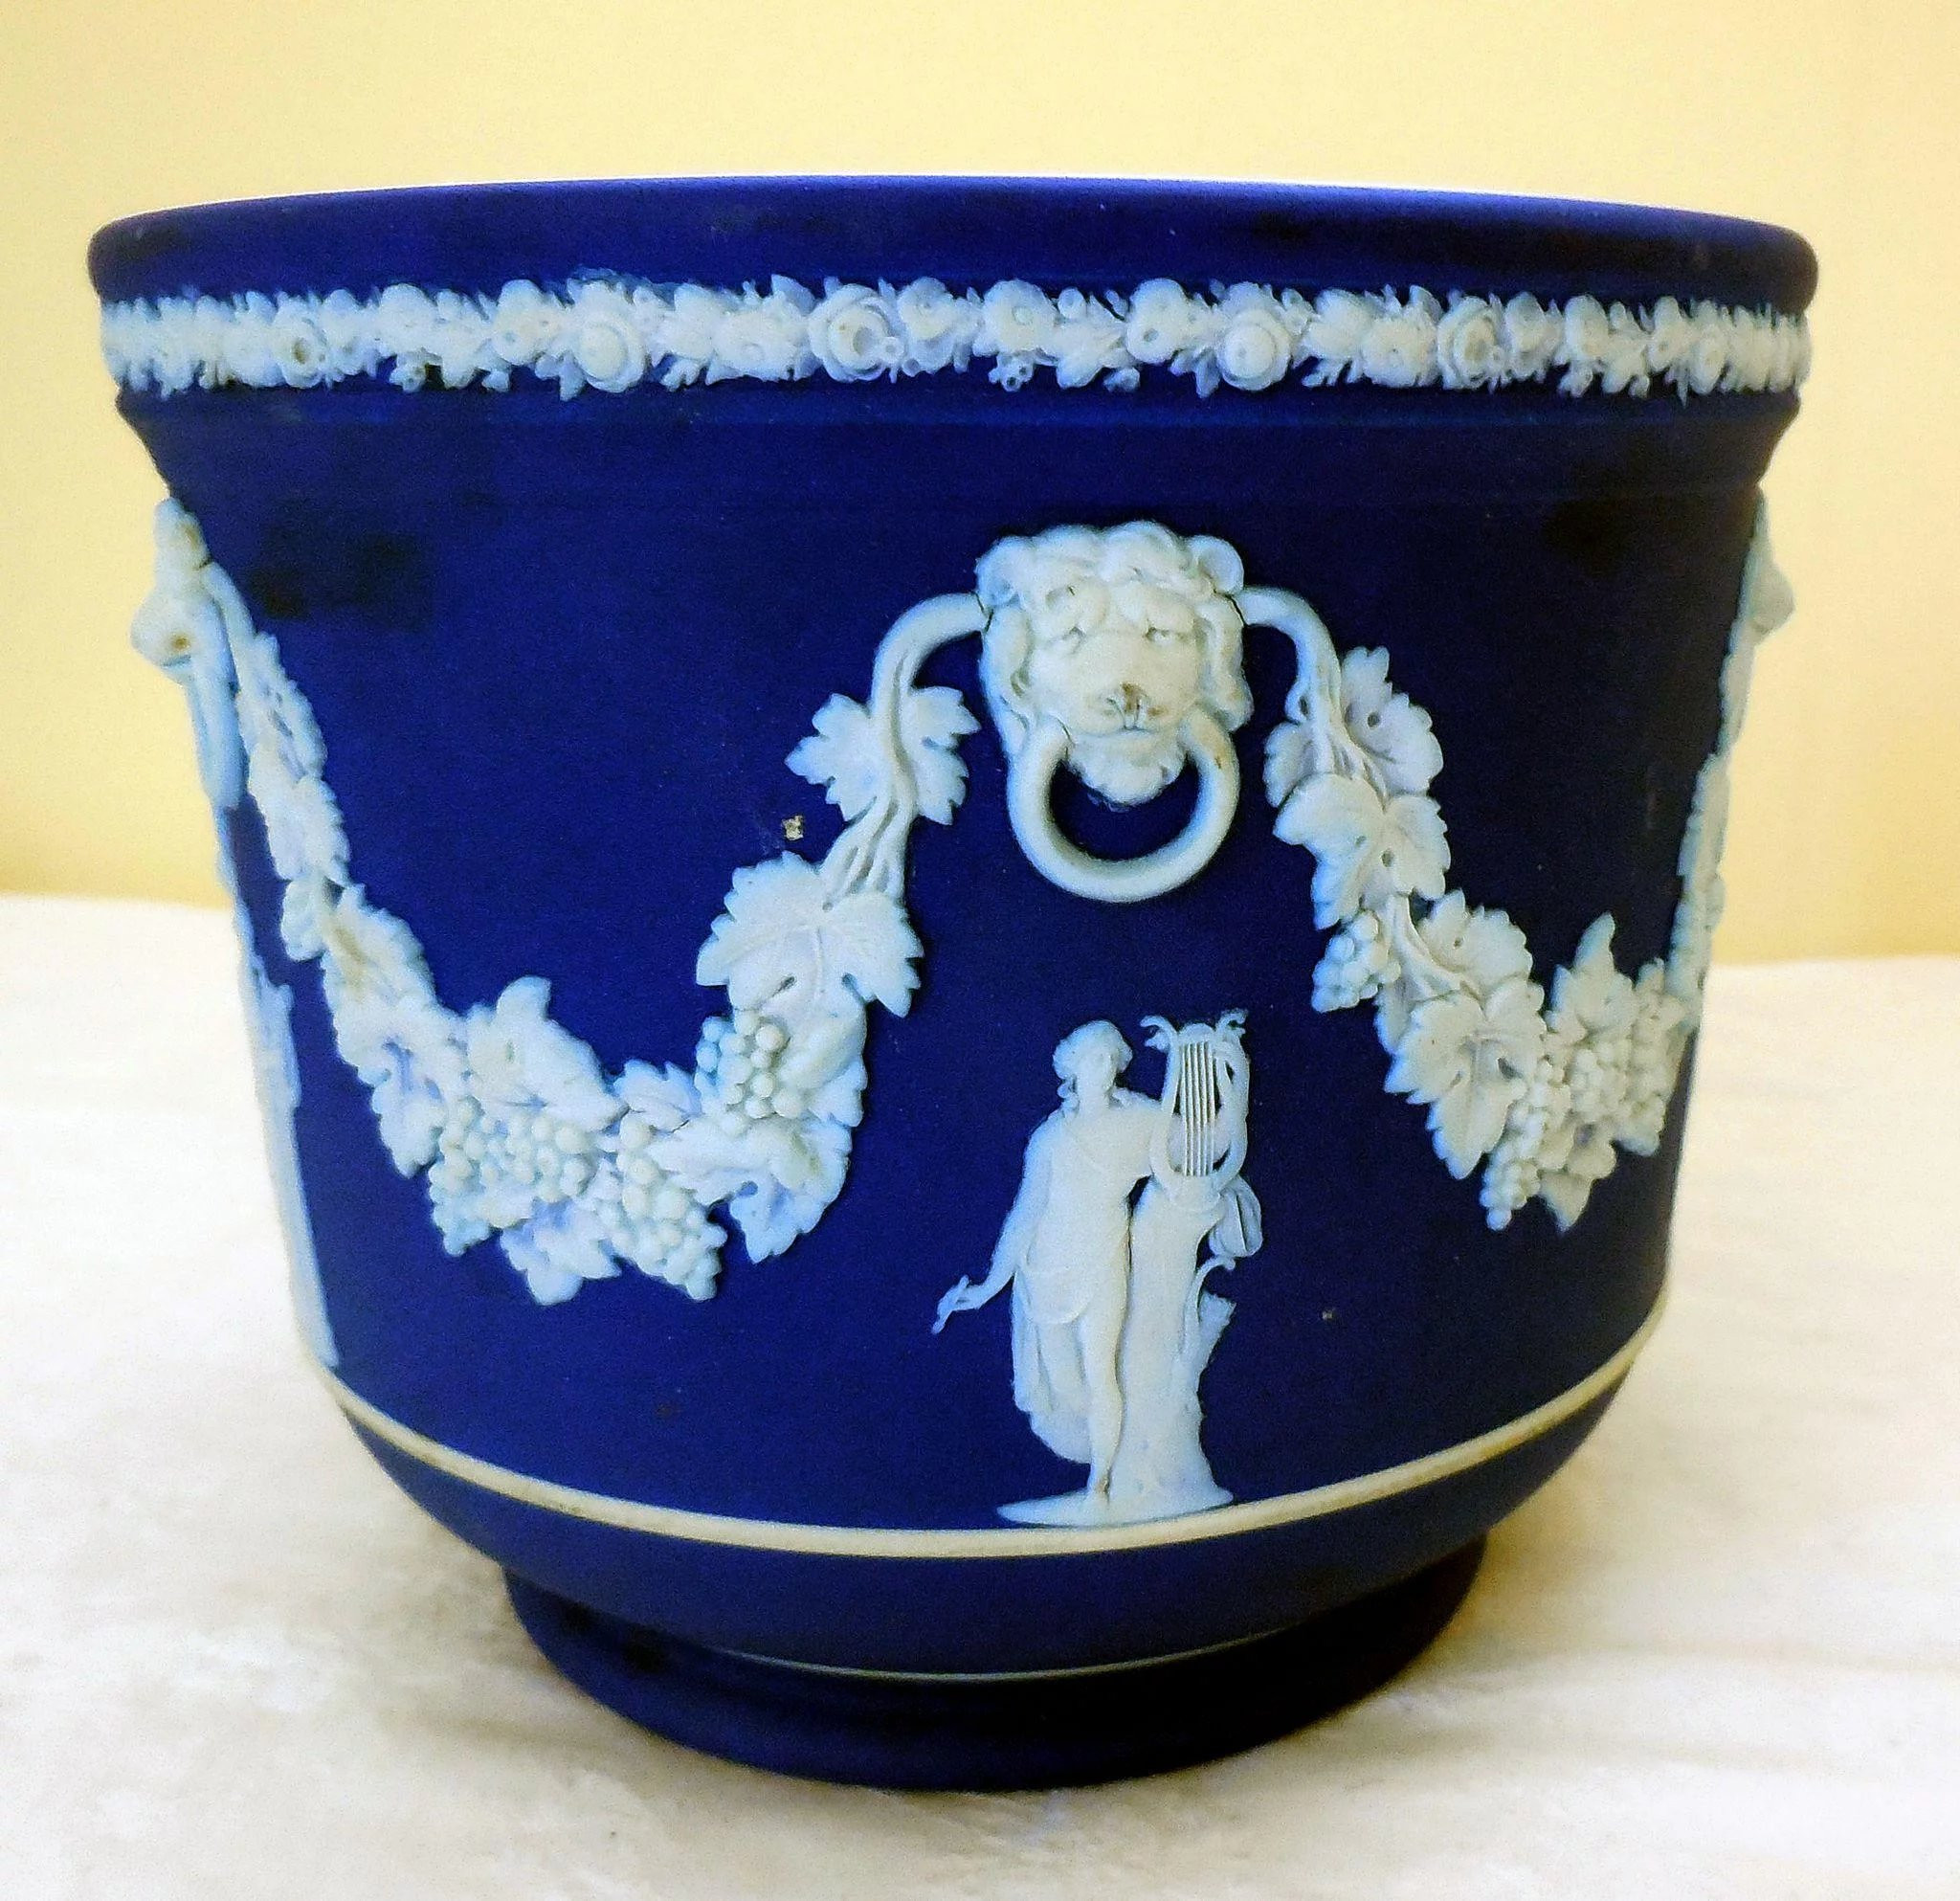 29 Lovable Wedgwood Vase Blue and White 2024 free download wedgwood vase blue and white of vintage cobalt blue wedgwood jasperware jardiniere sna treasures in vintage cobalt blue wedgwood jasperware jardiniere click to expand